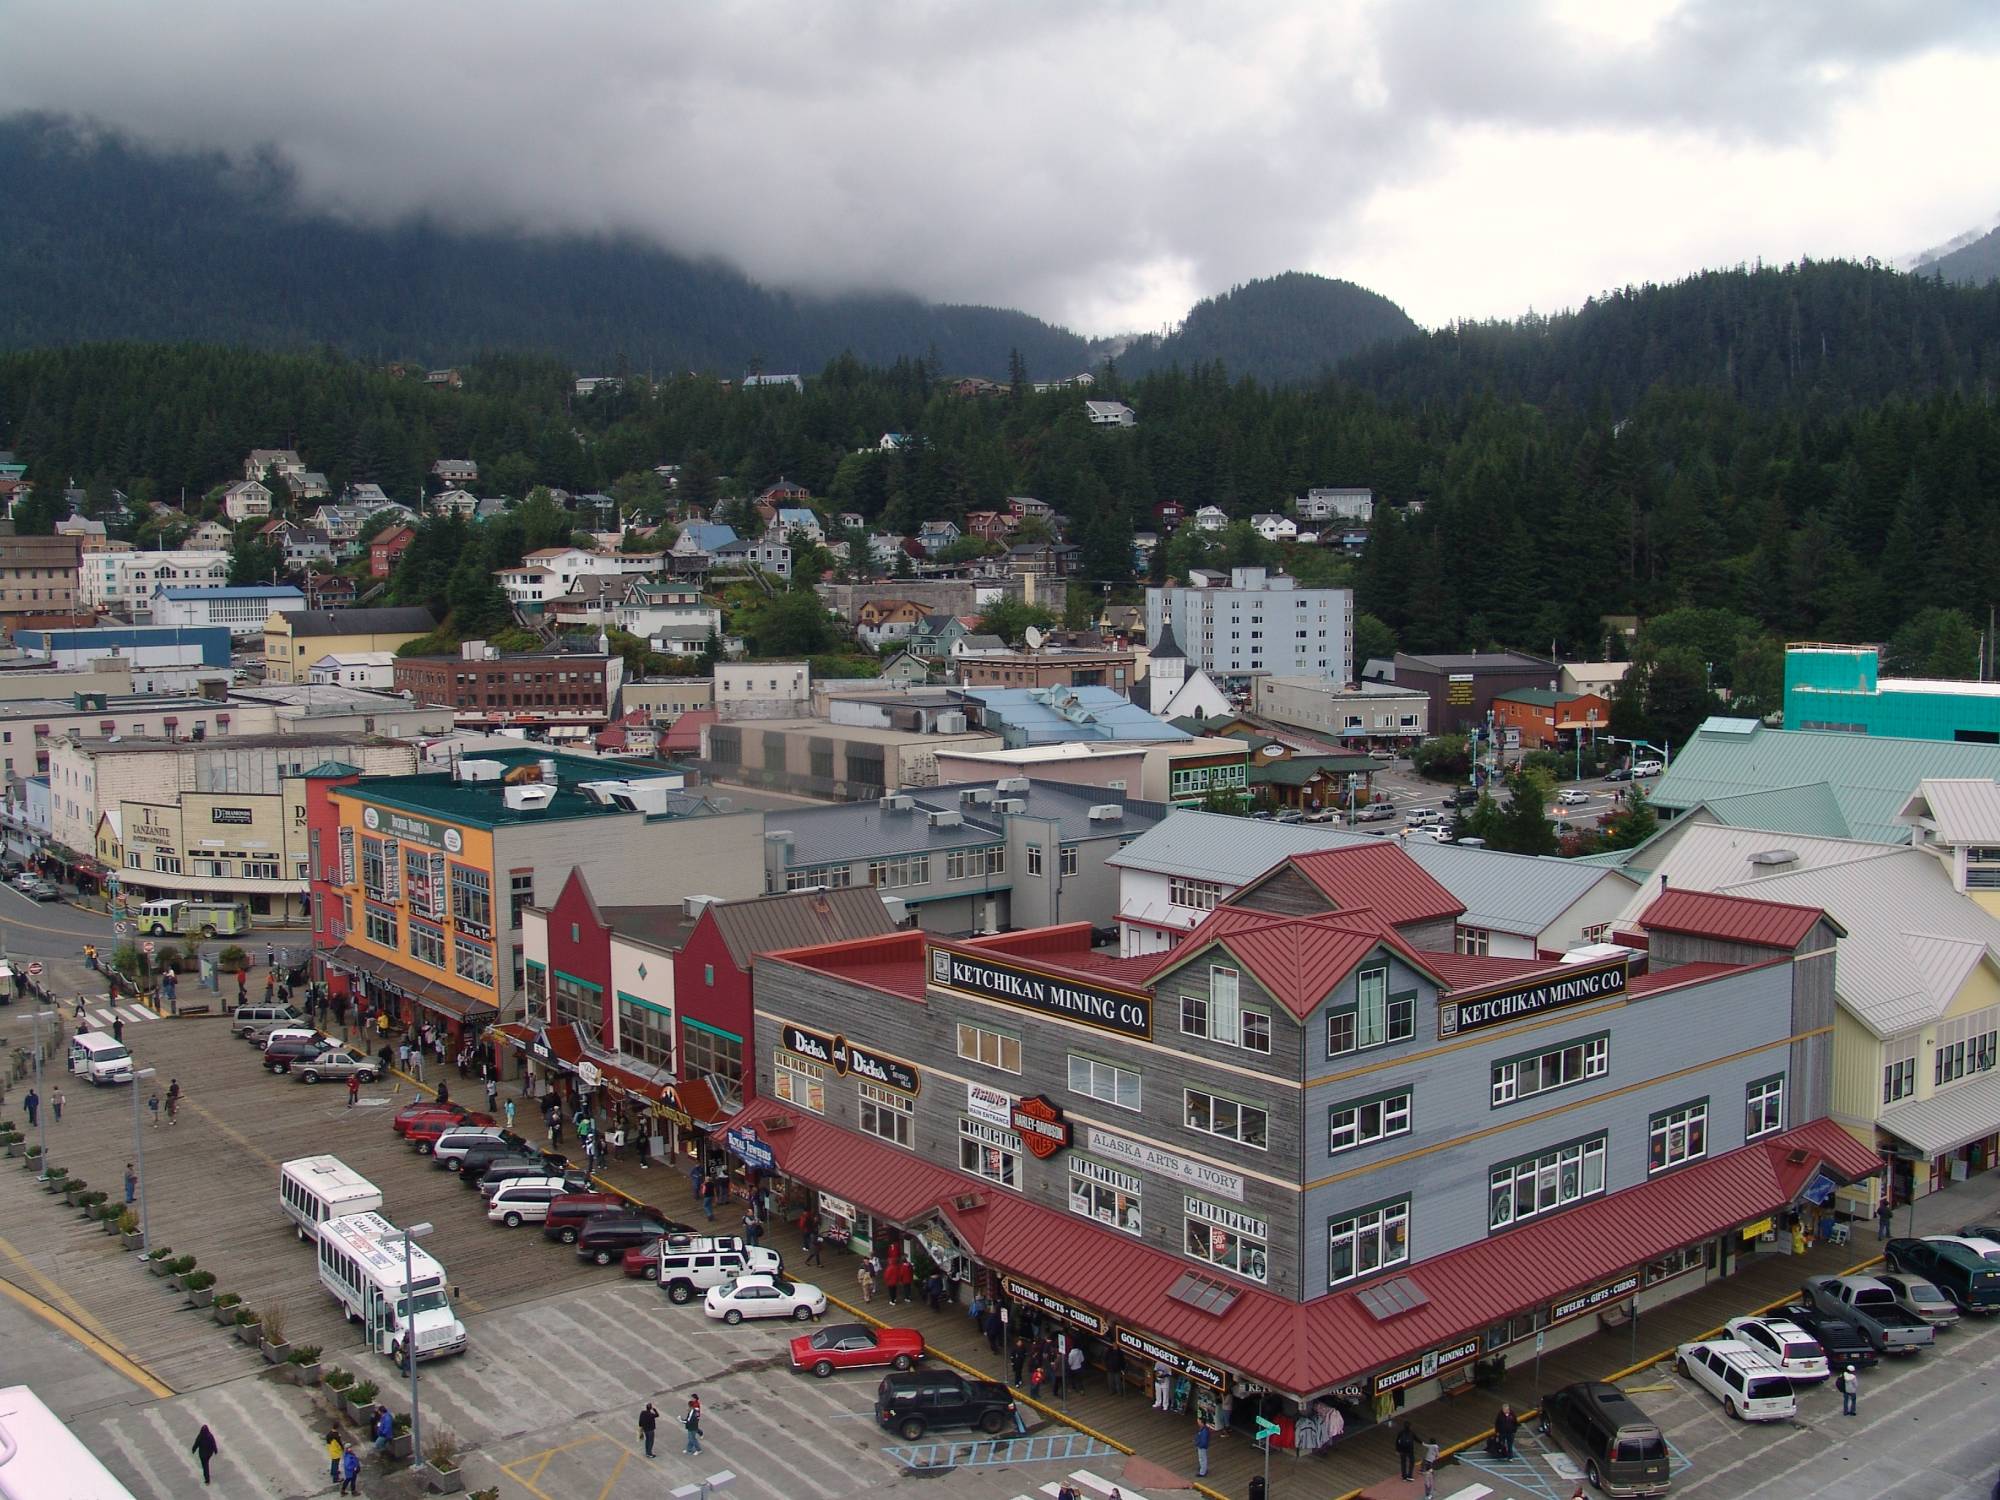 Ketchikan - from the Wonder